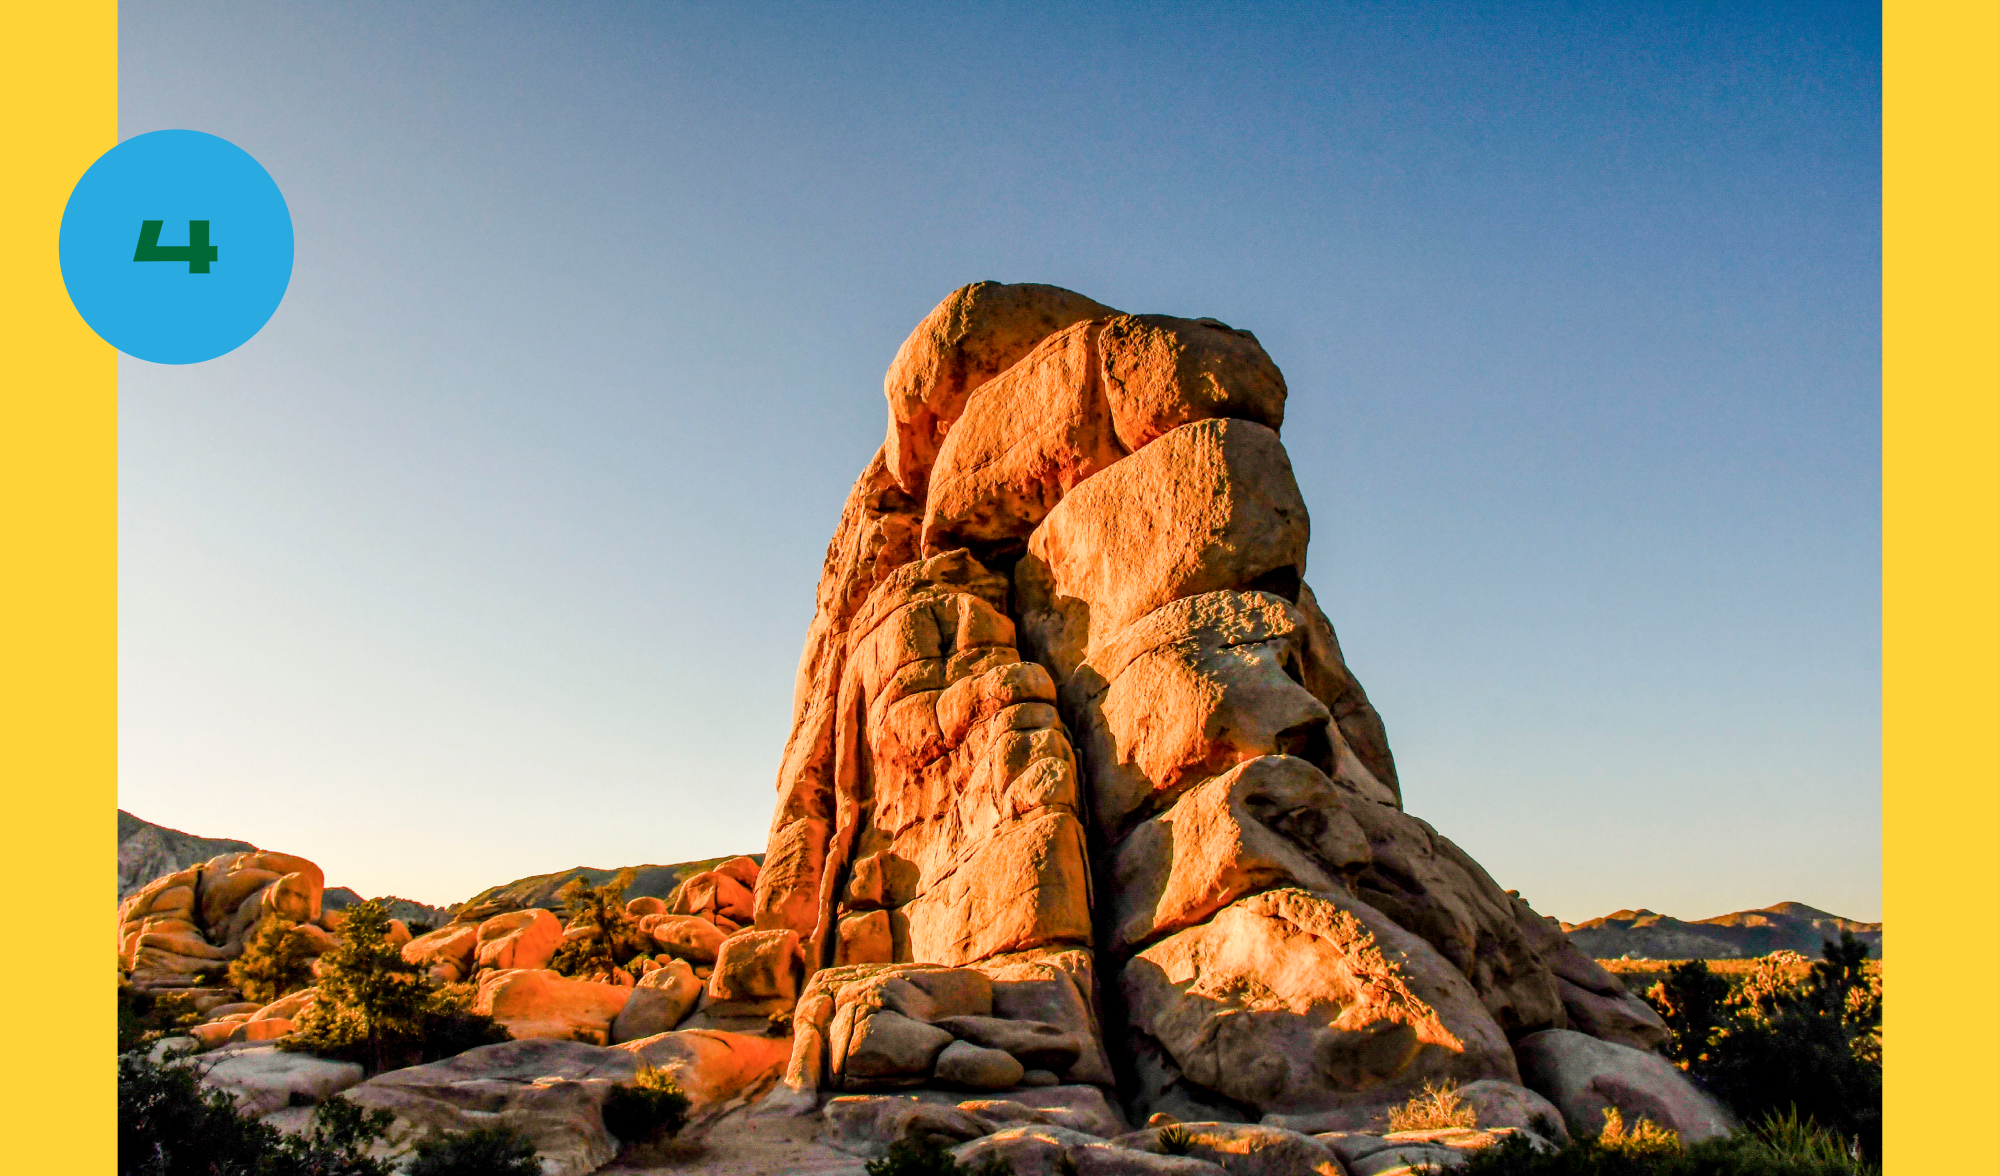 A carved boulder tower in Hidden Valley Campground, Joshua Tree National Park.